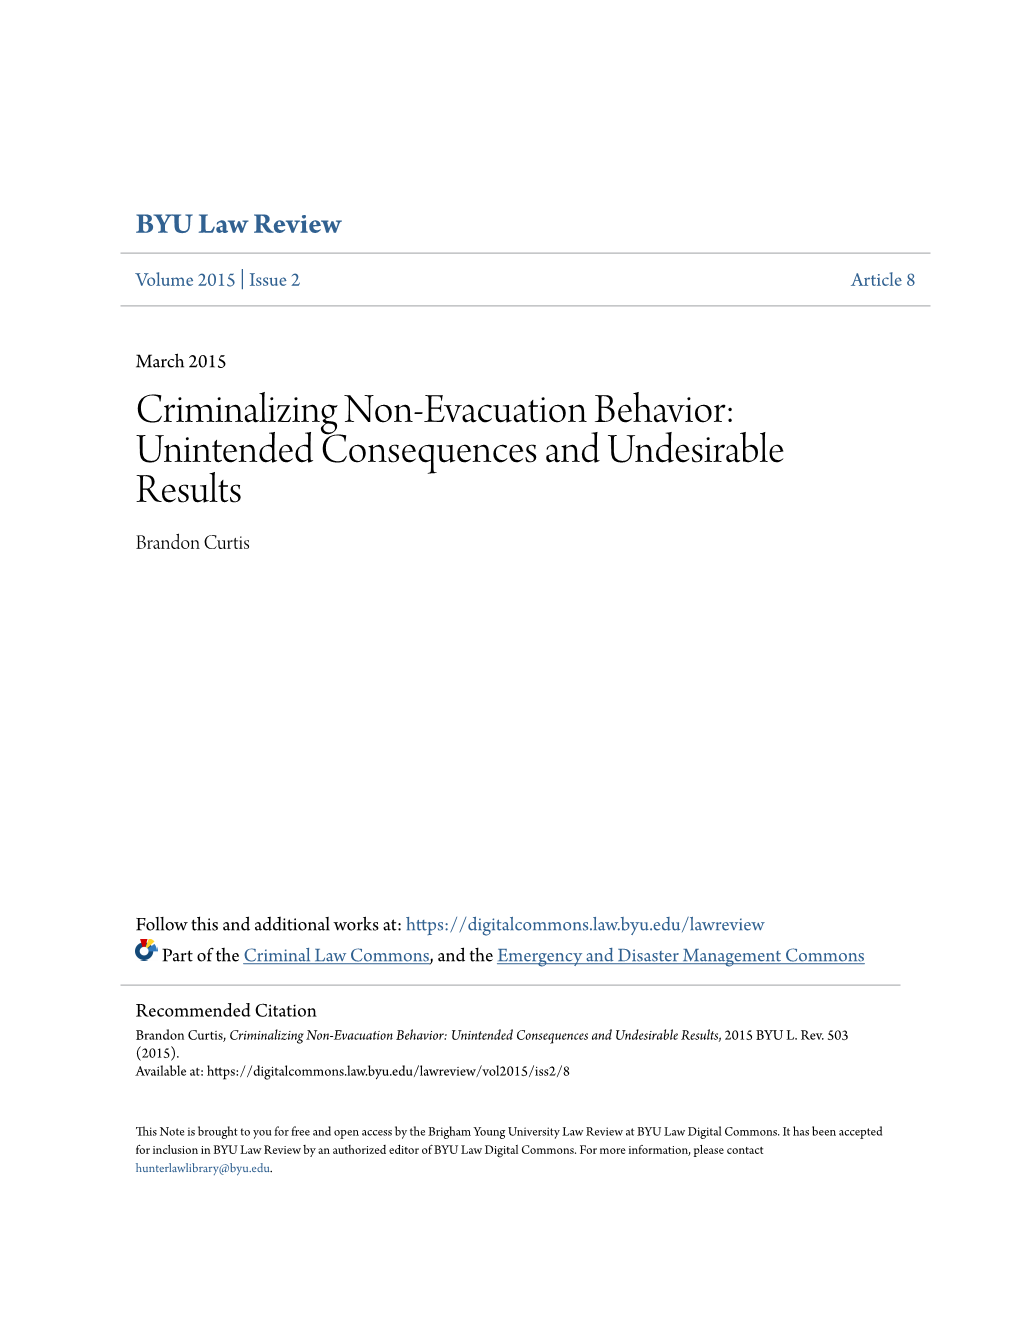 Criminalizing Non-Evacuation Behavior: Unintended Consequences and Undesirable Results Brandon Curtis